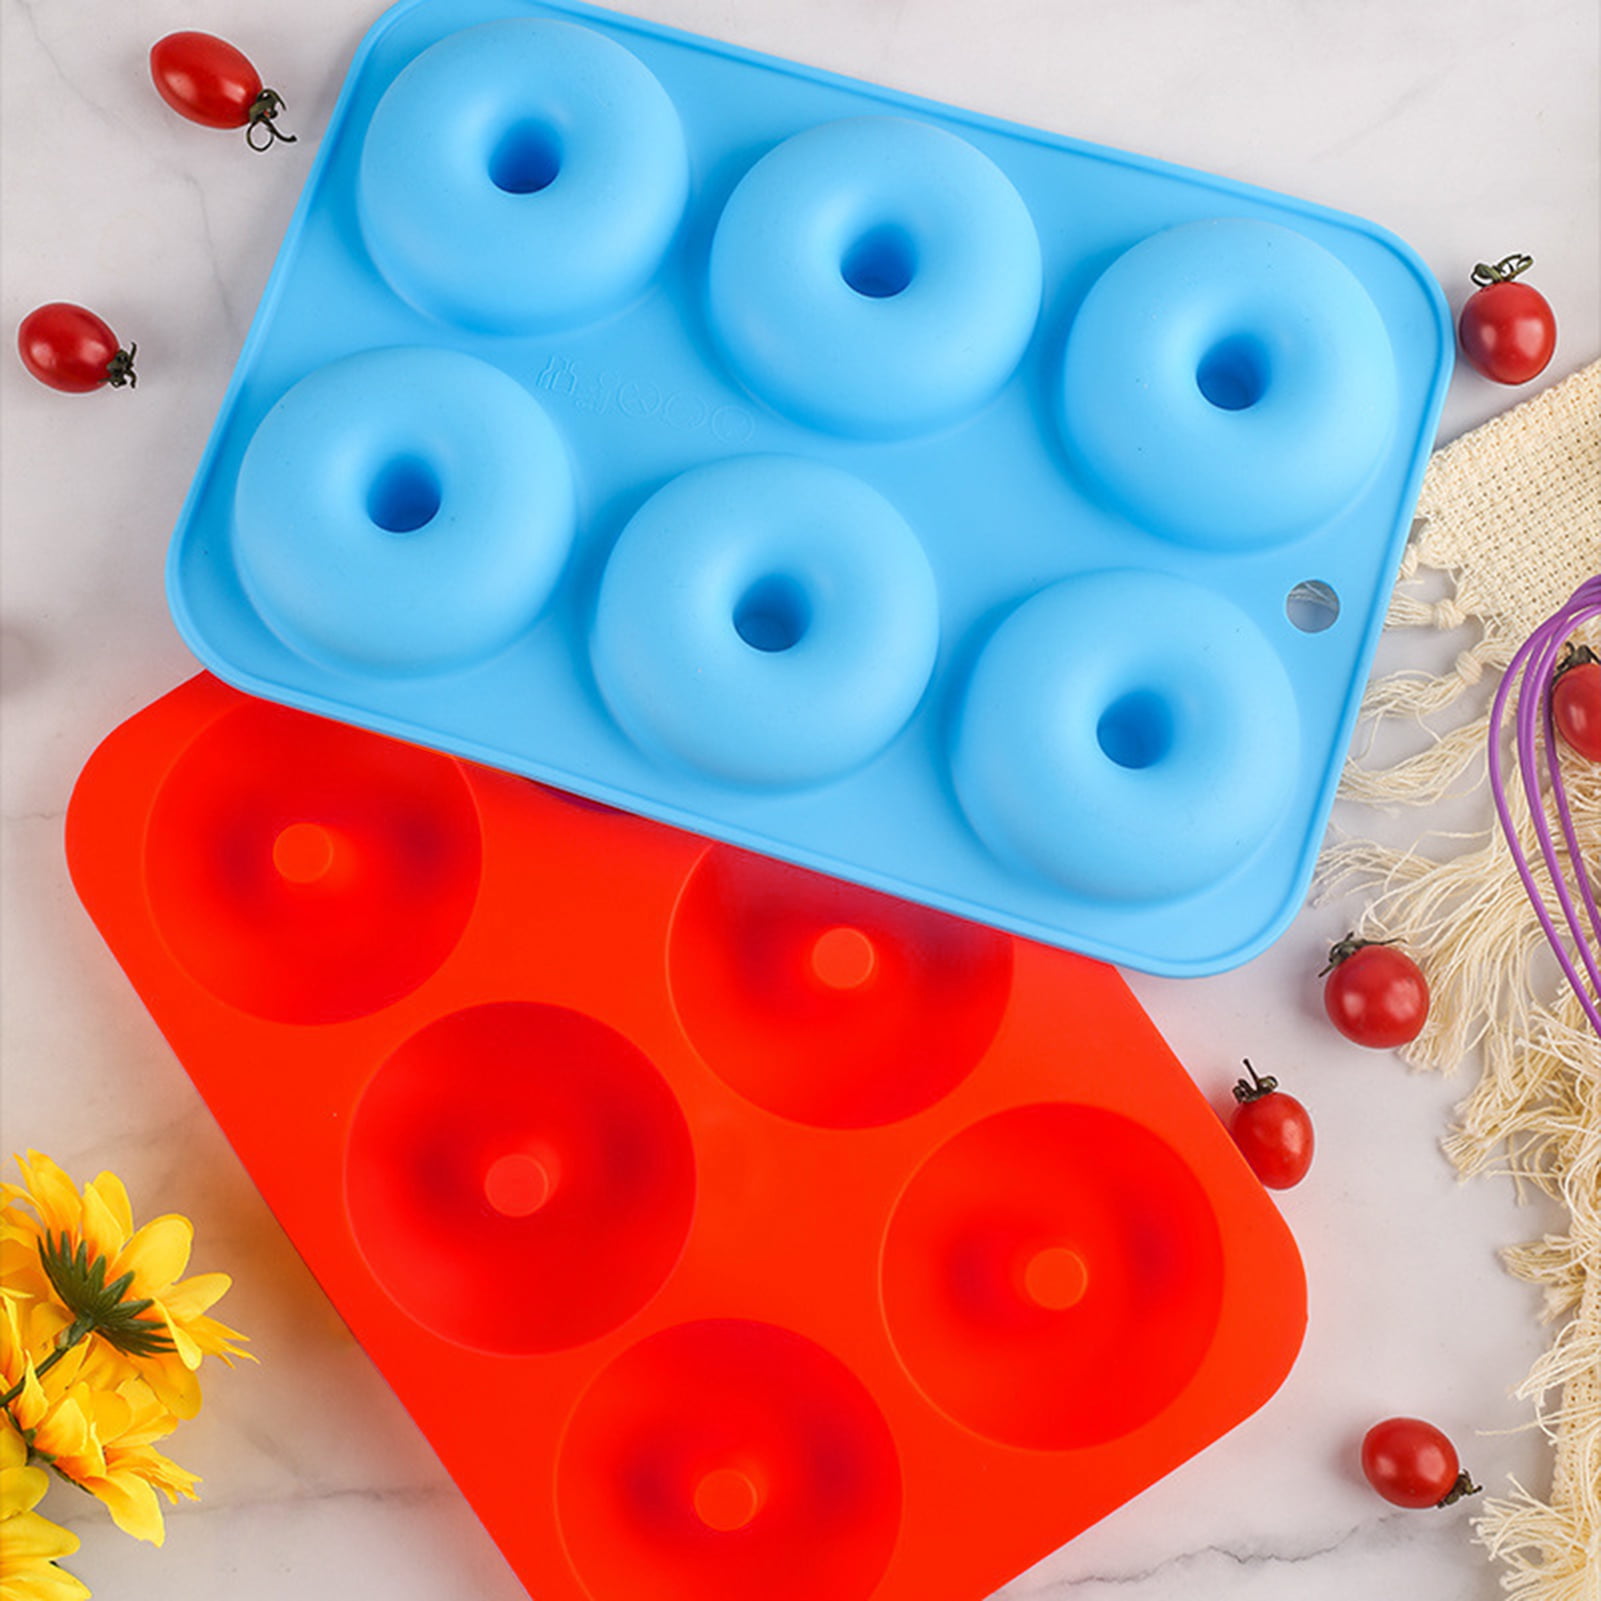 Anaeat Full Size Donut Baking Pans 3 Pack, Big Size 4 Inch Silicone Baking  Mold, Just Pop Out! Non Stick 6-Cavity Doughnut Trays for Bagels Donuts